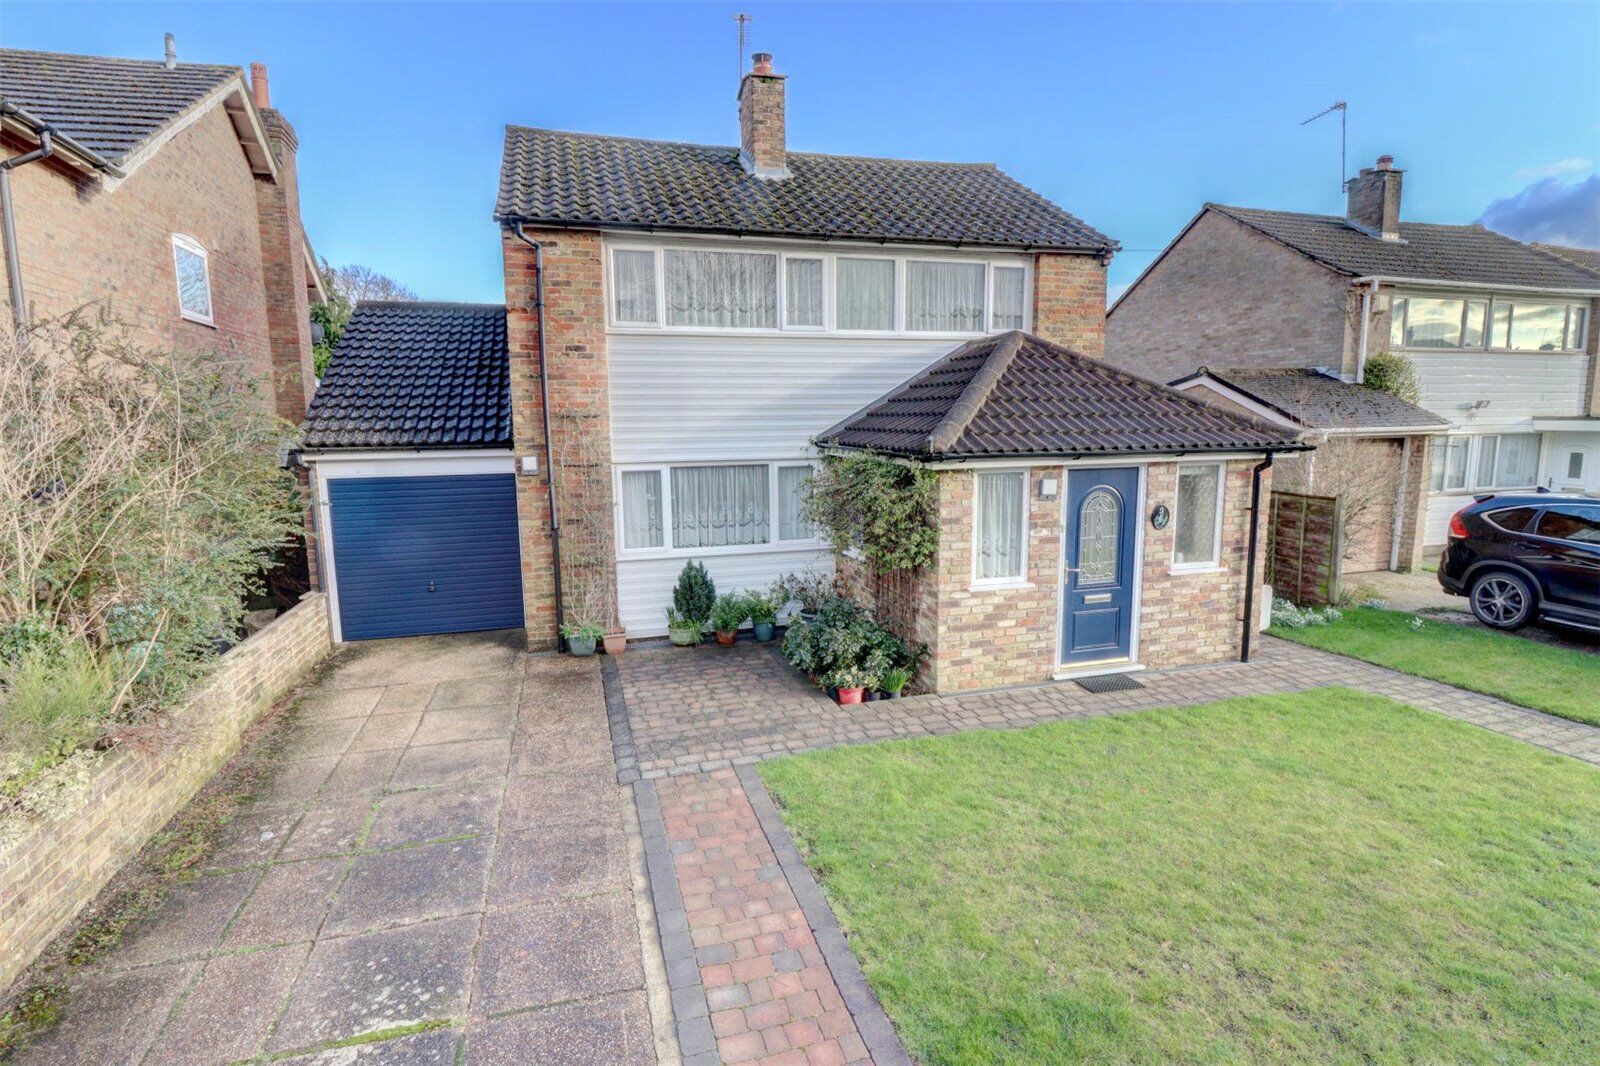 4 bedroom detached house for sale Highworth Close, High Wycombe, HP13, main image